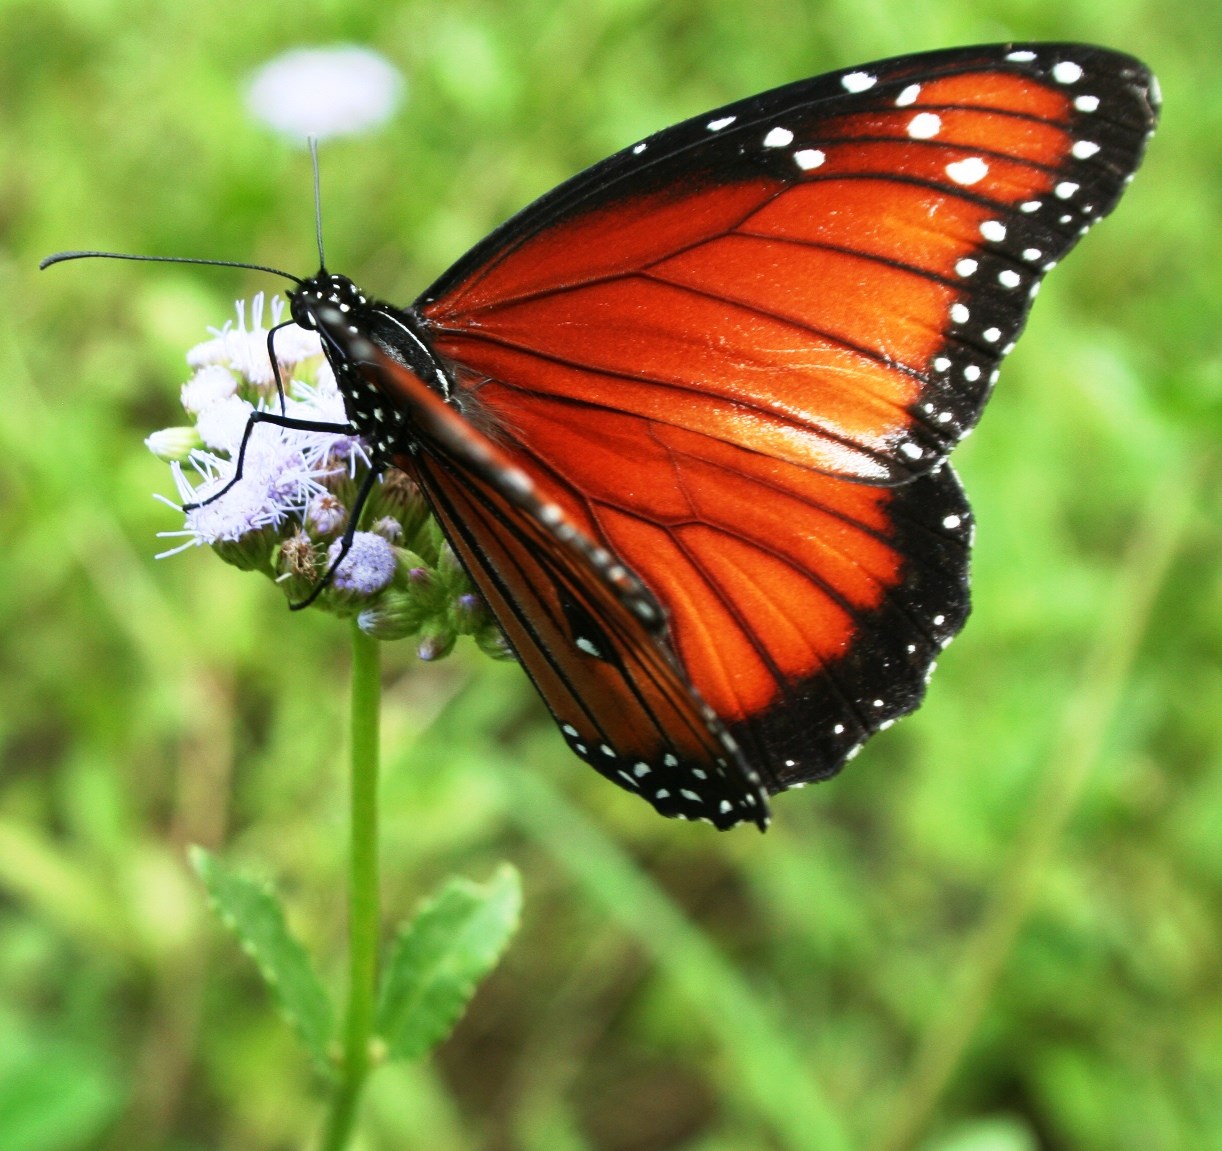 A queen butterfly eating from a Texas thistle.